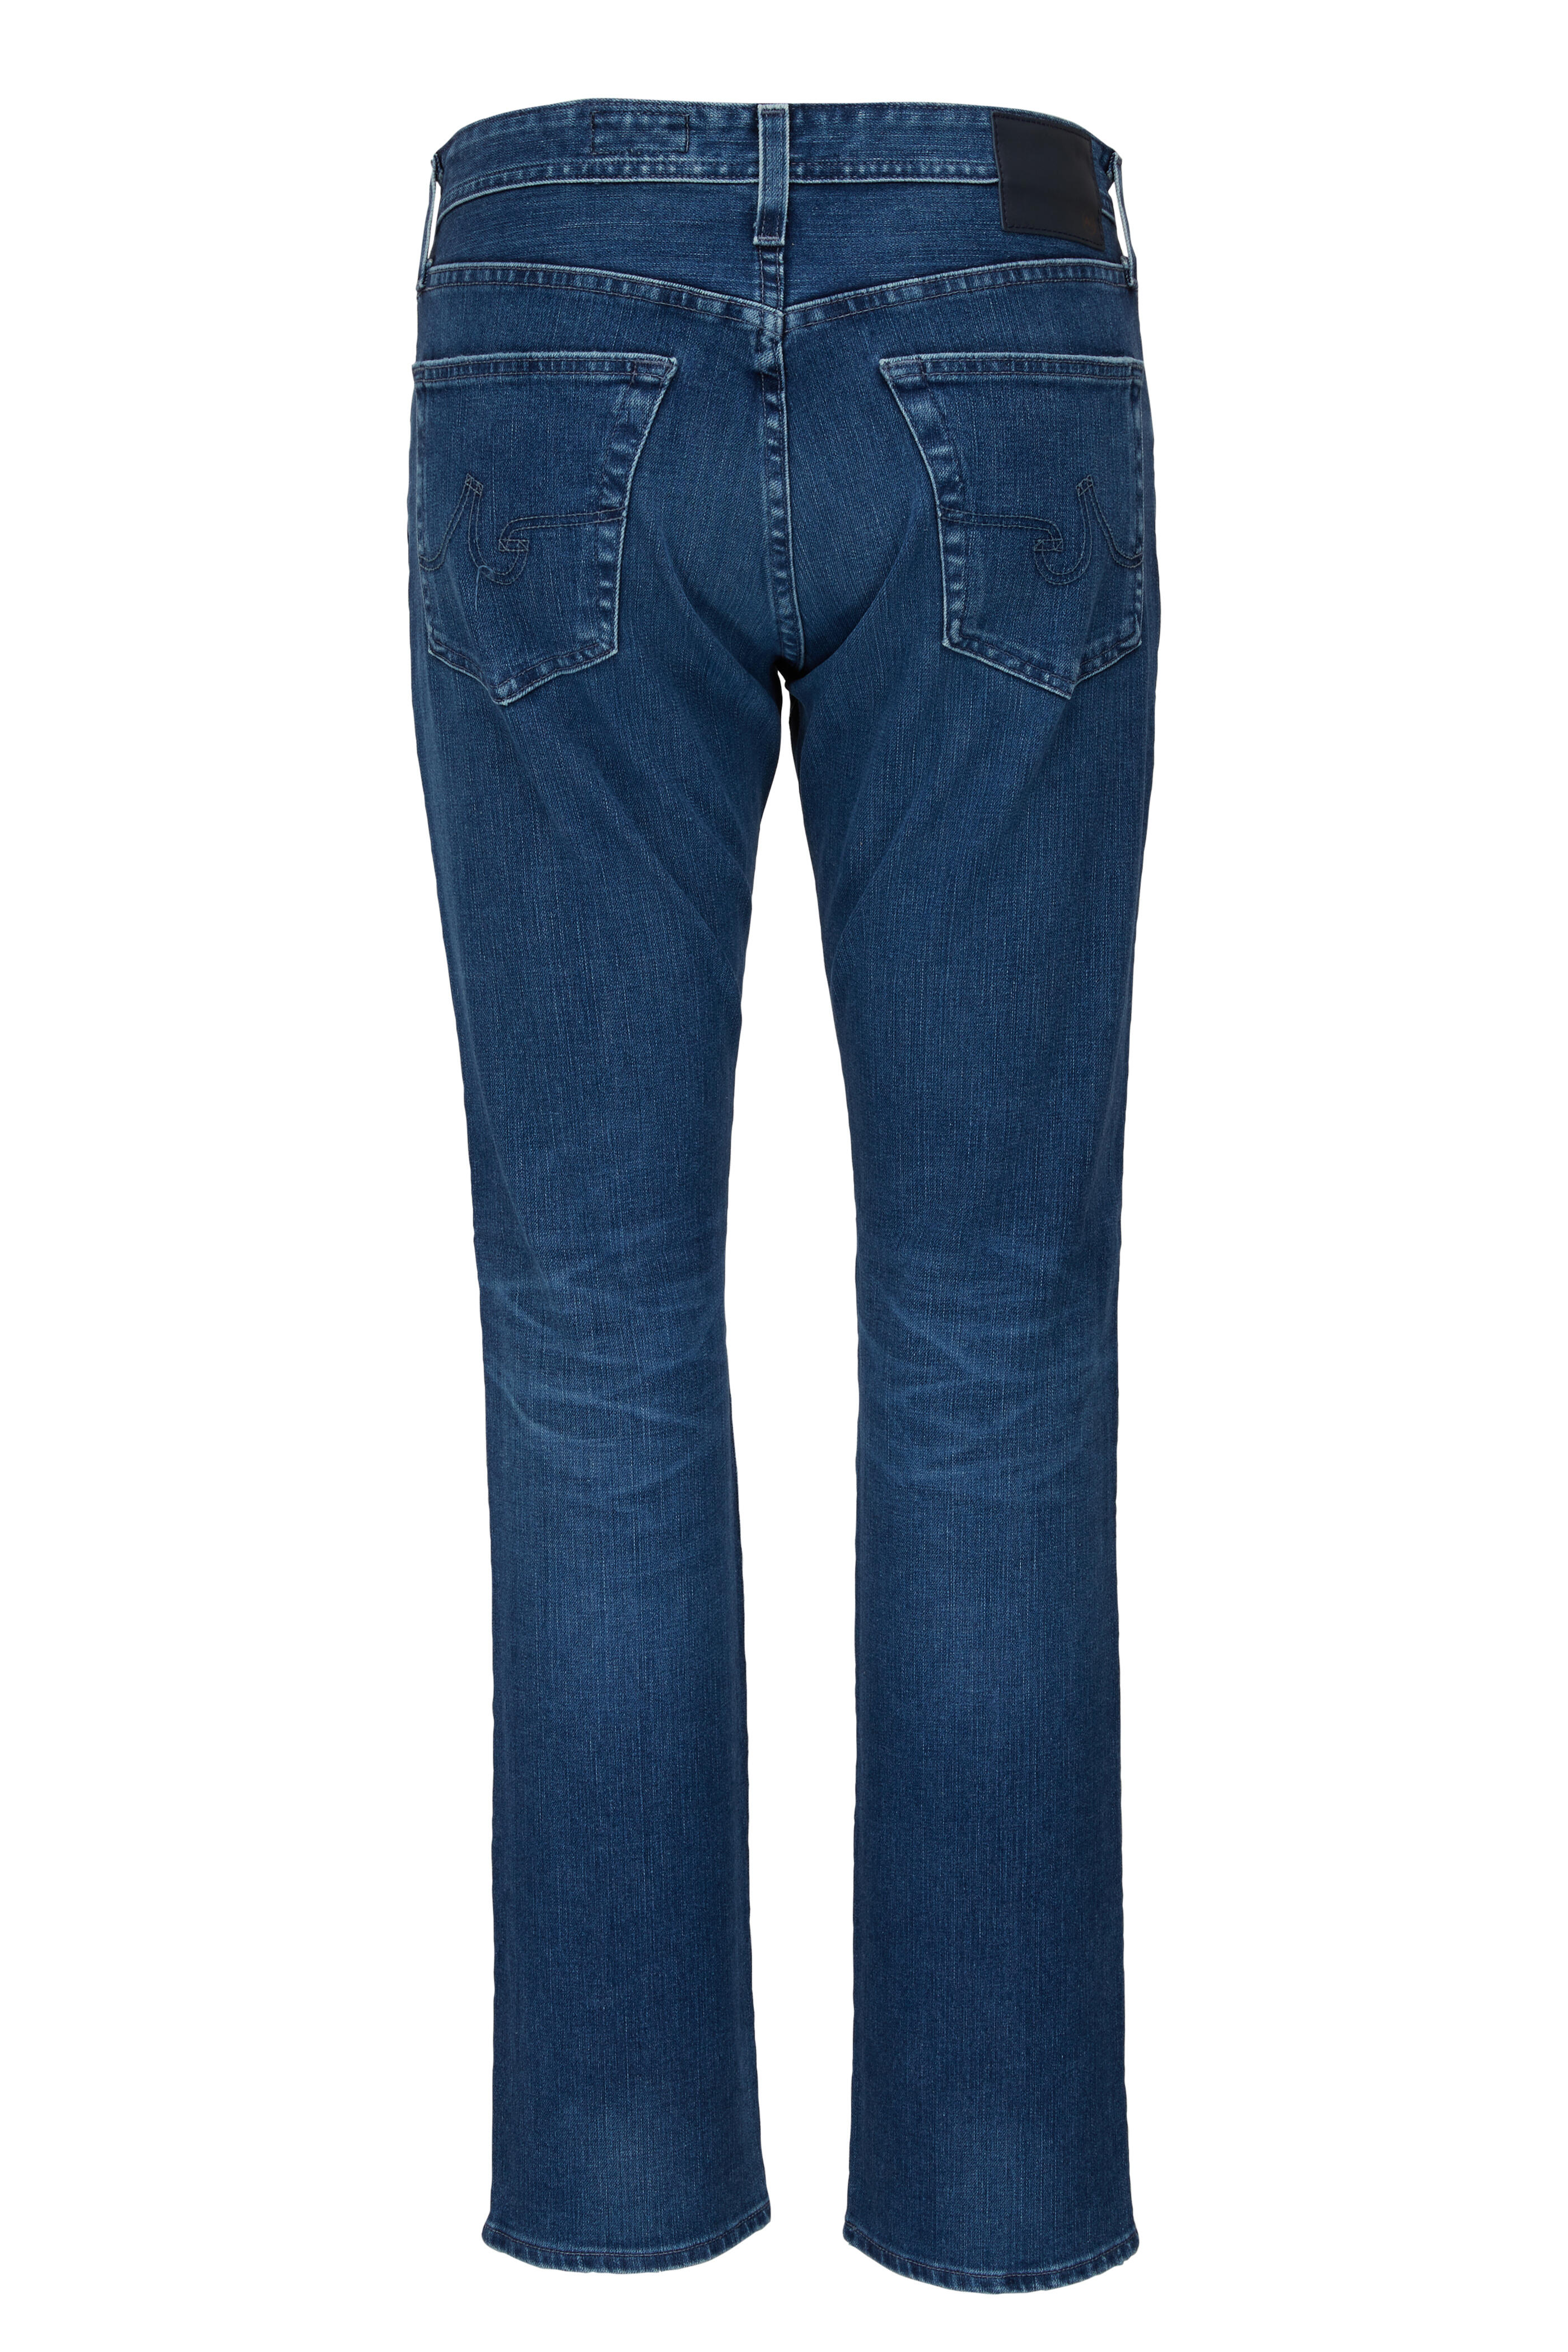 AG - The Graduate 10 Years Riant Tailored Leg Jean